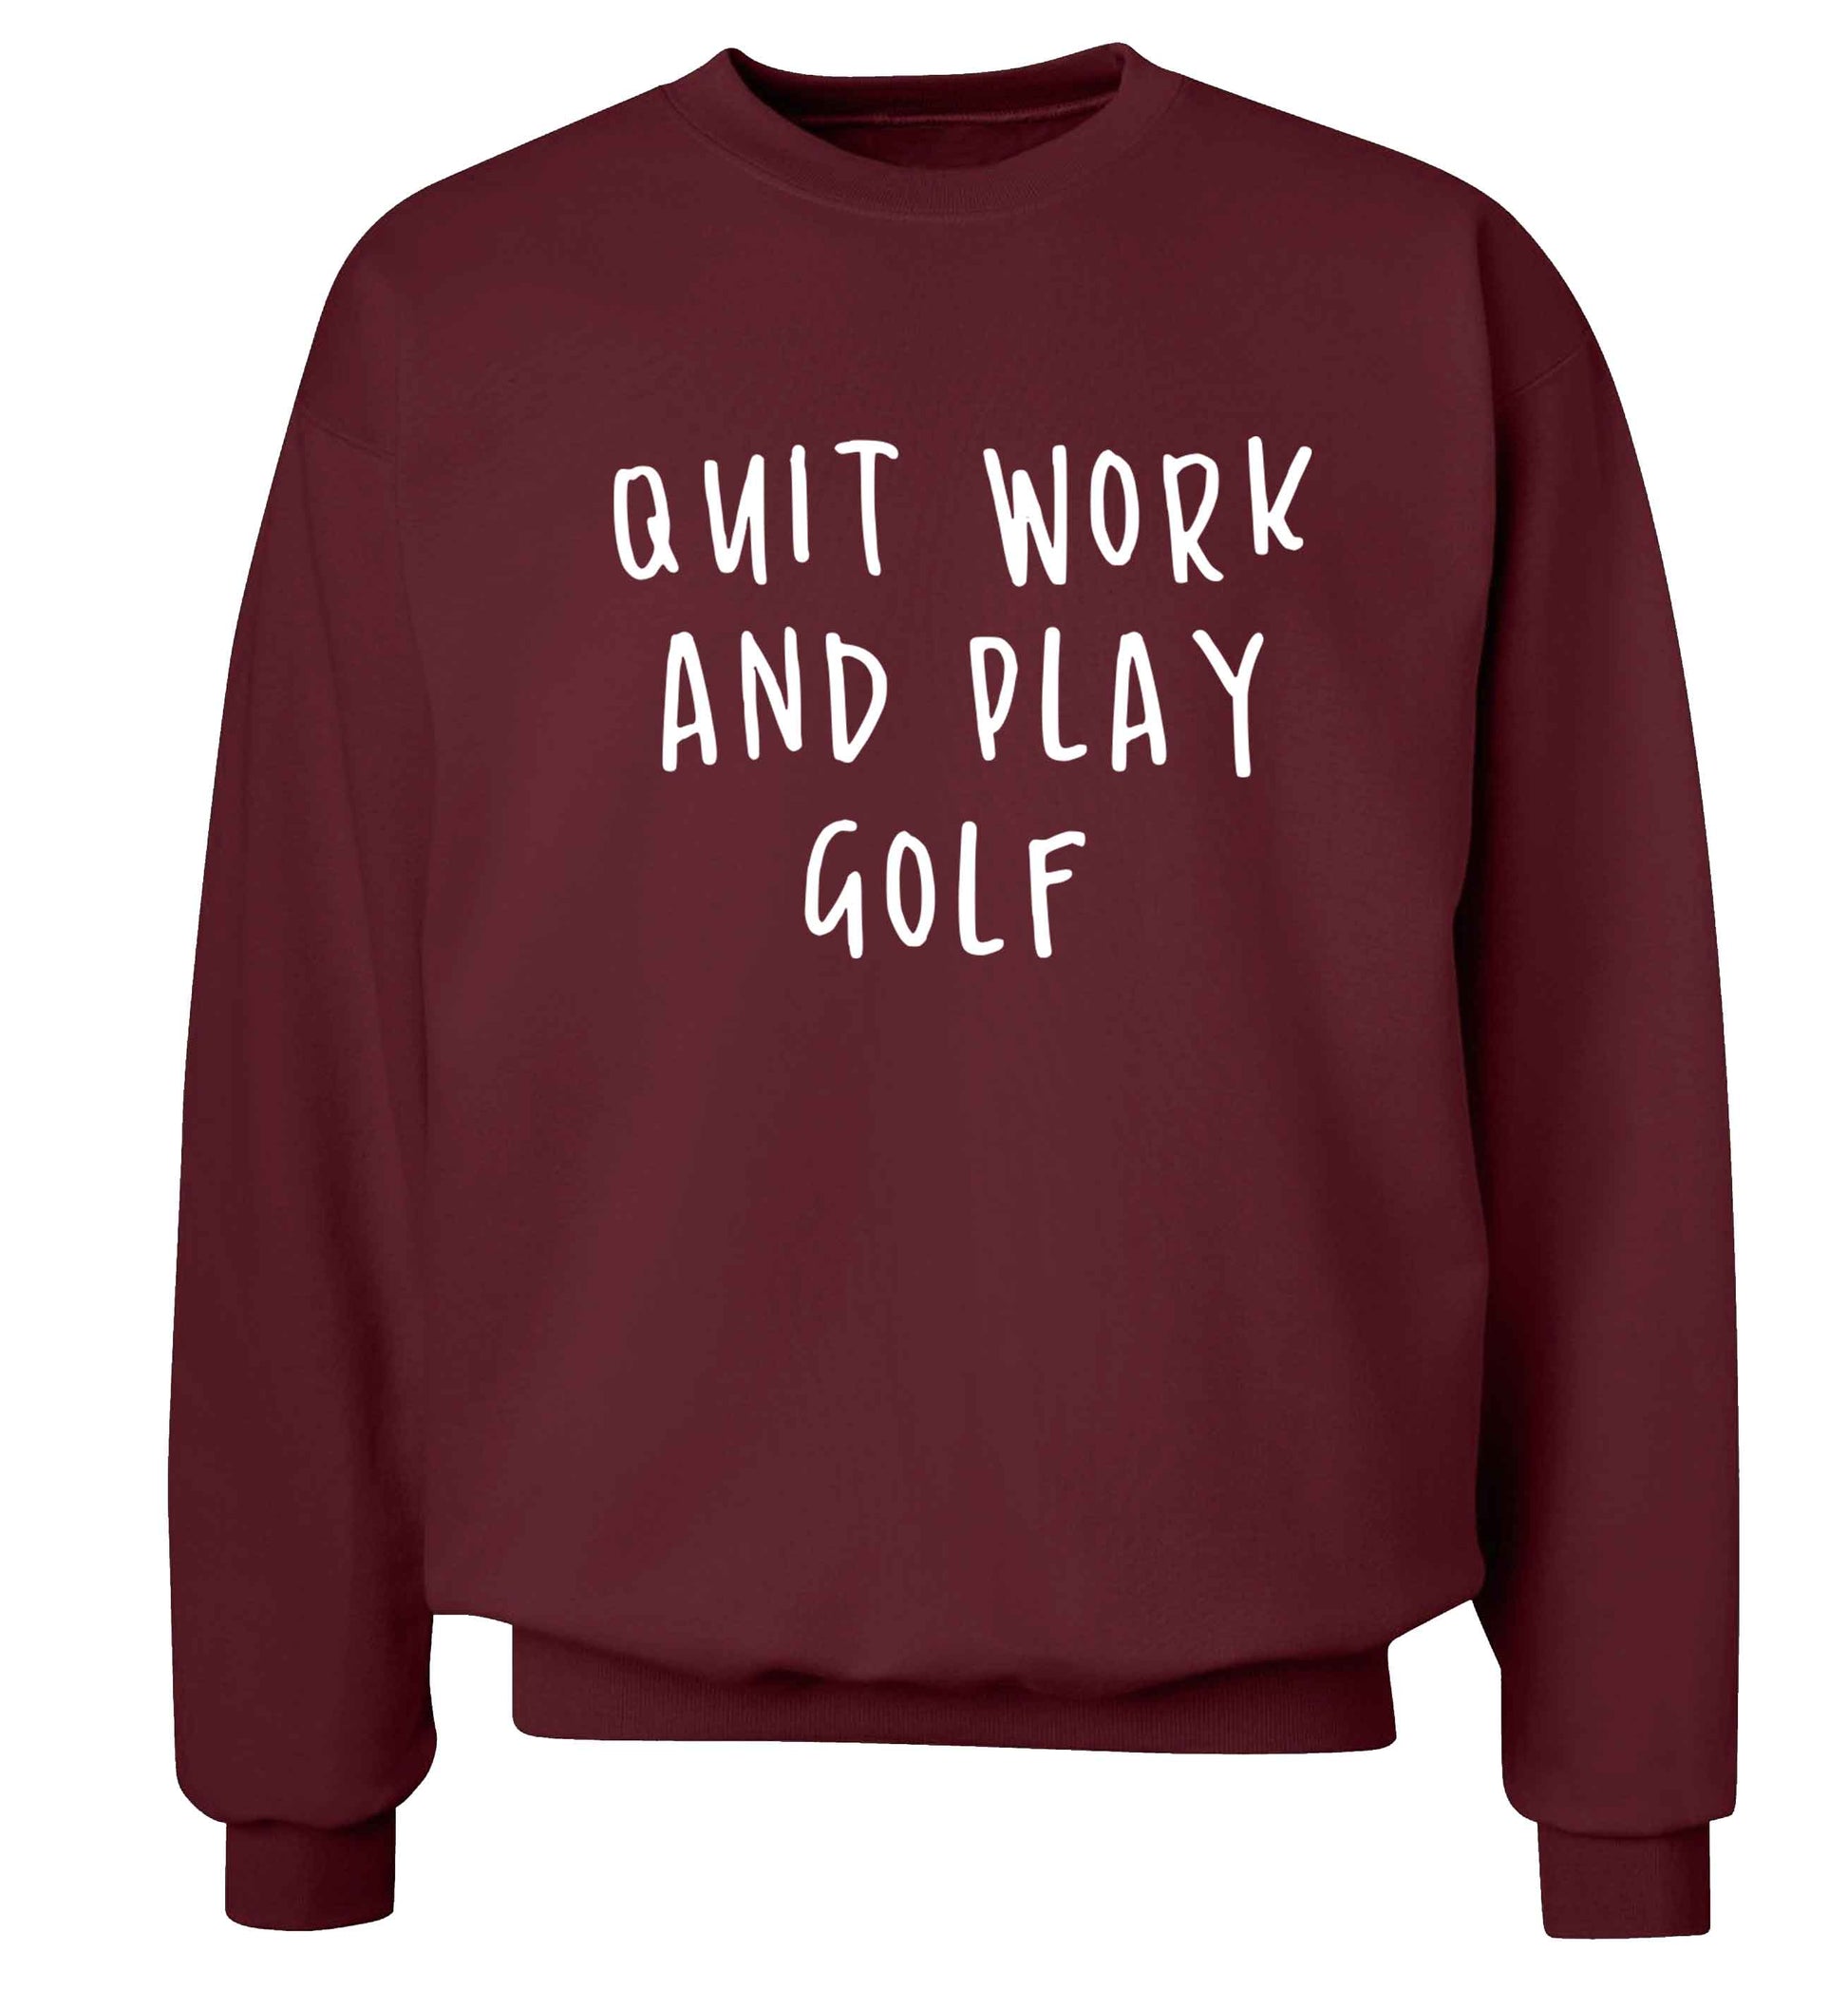 Quit work and play golf Adult's unisex maroon Sweater 2XL